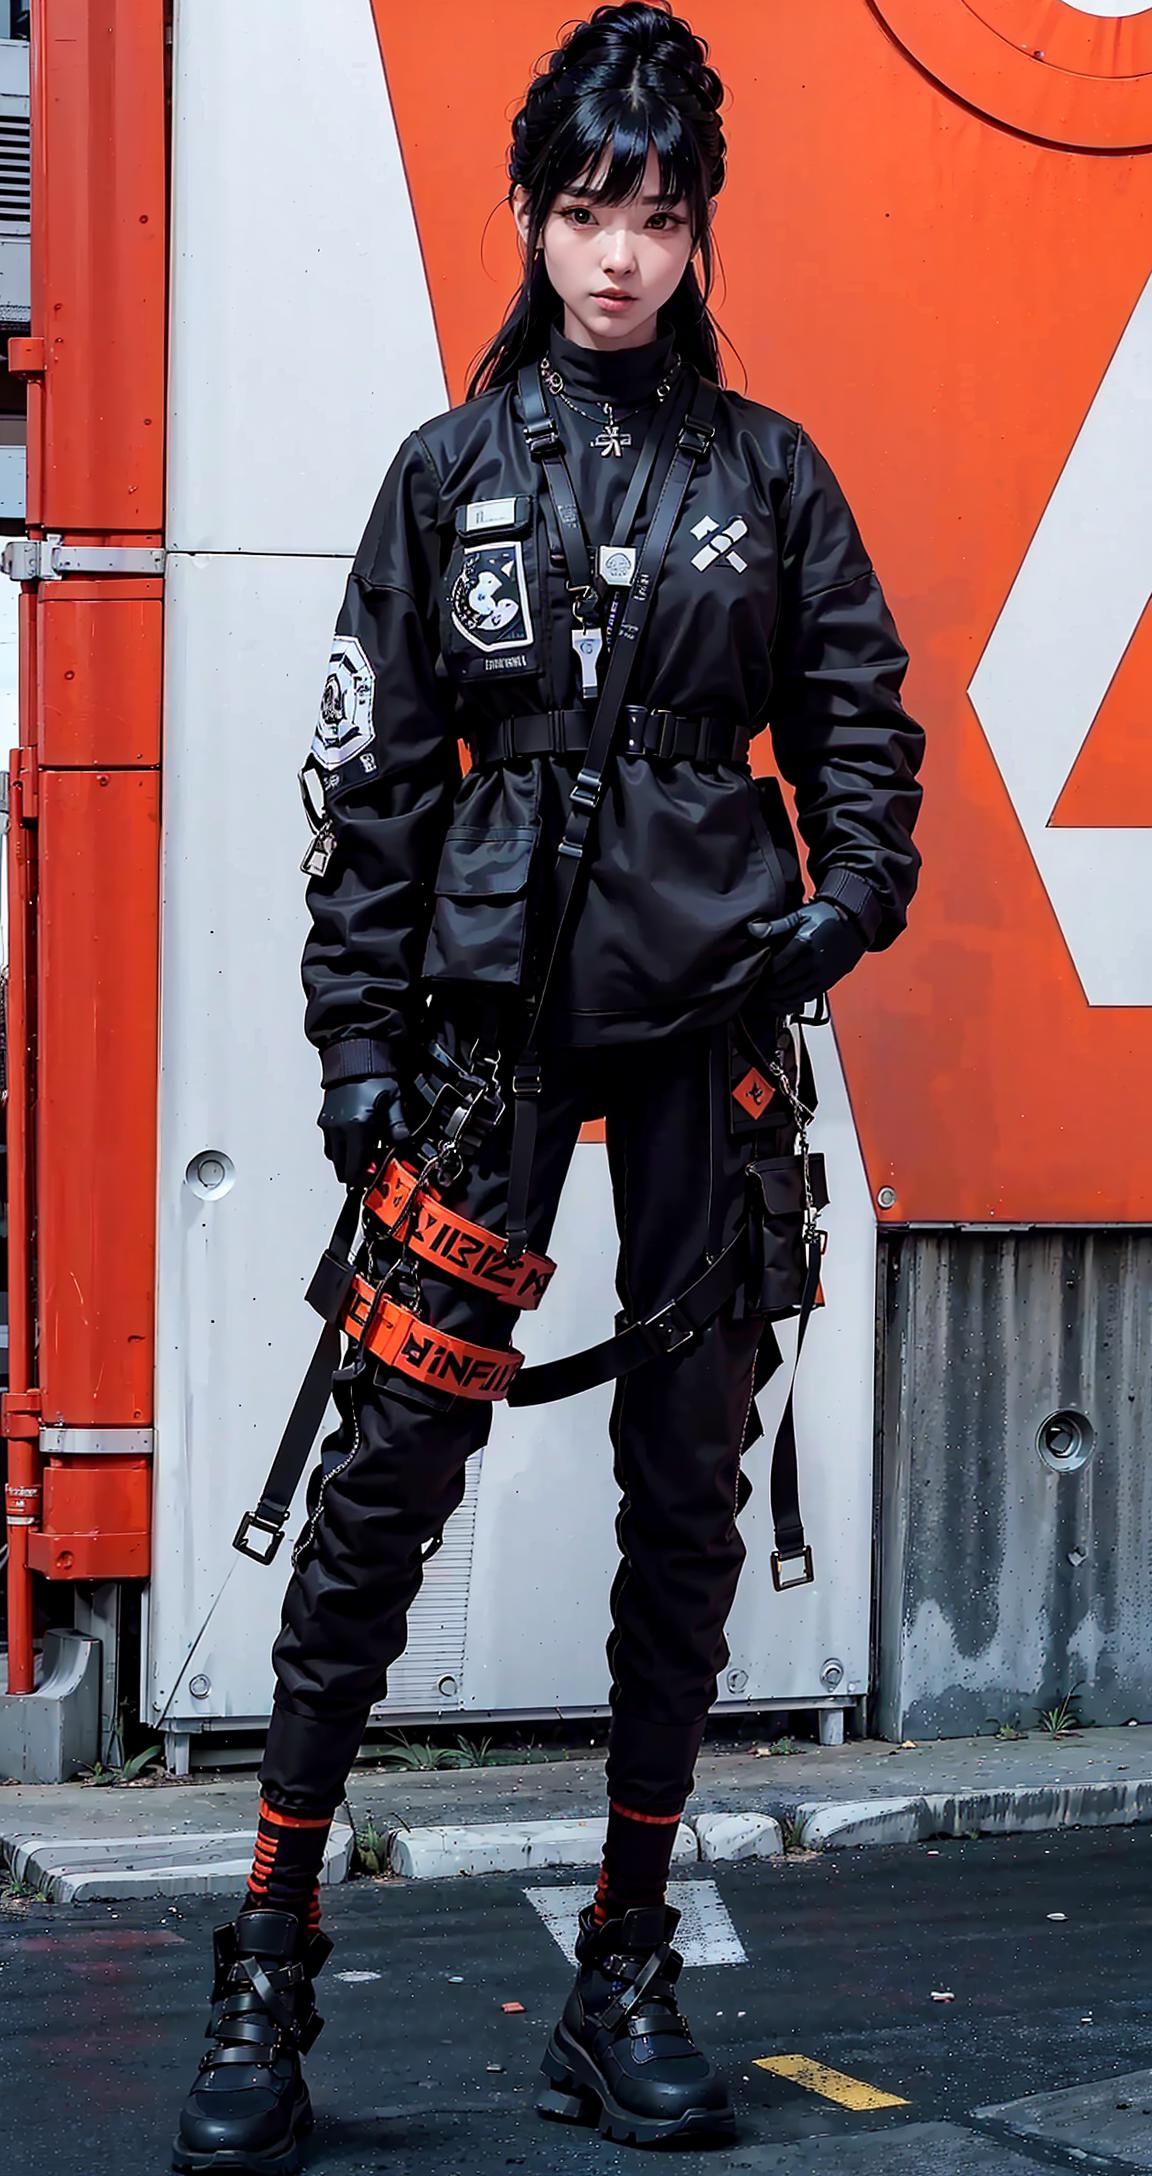 A woman wearing a black jacket, black pants, and black gloves stands in front of a red and white wall. She appears to be wearing a harness and is holding a rope. The scene is set in an industrial setting with a truck in the background.